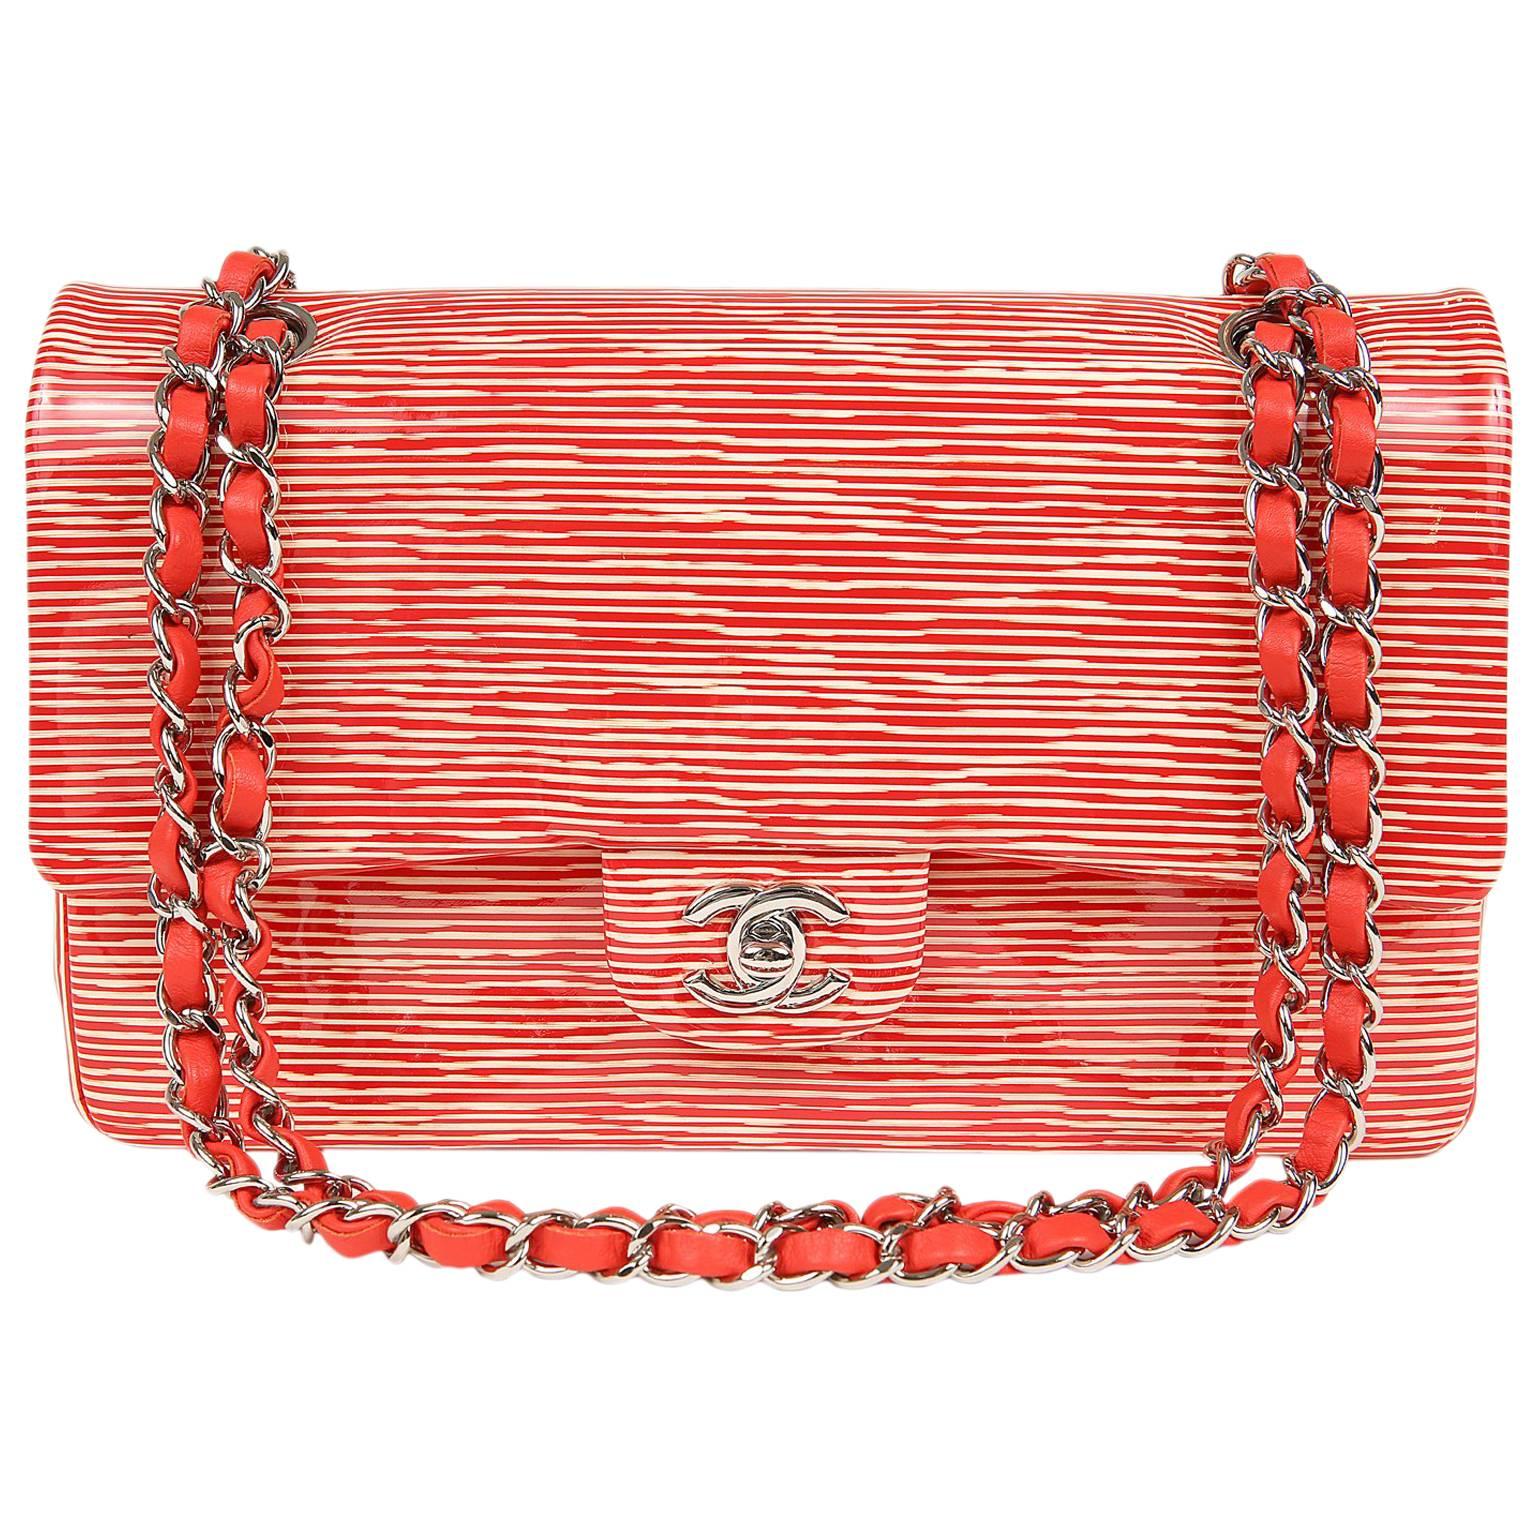 Chanel Red and Cream Striped Patent Leather Classic Flap- Medium